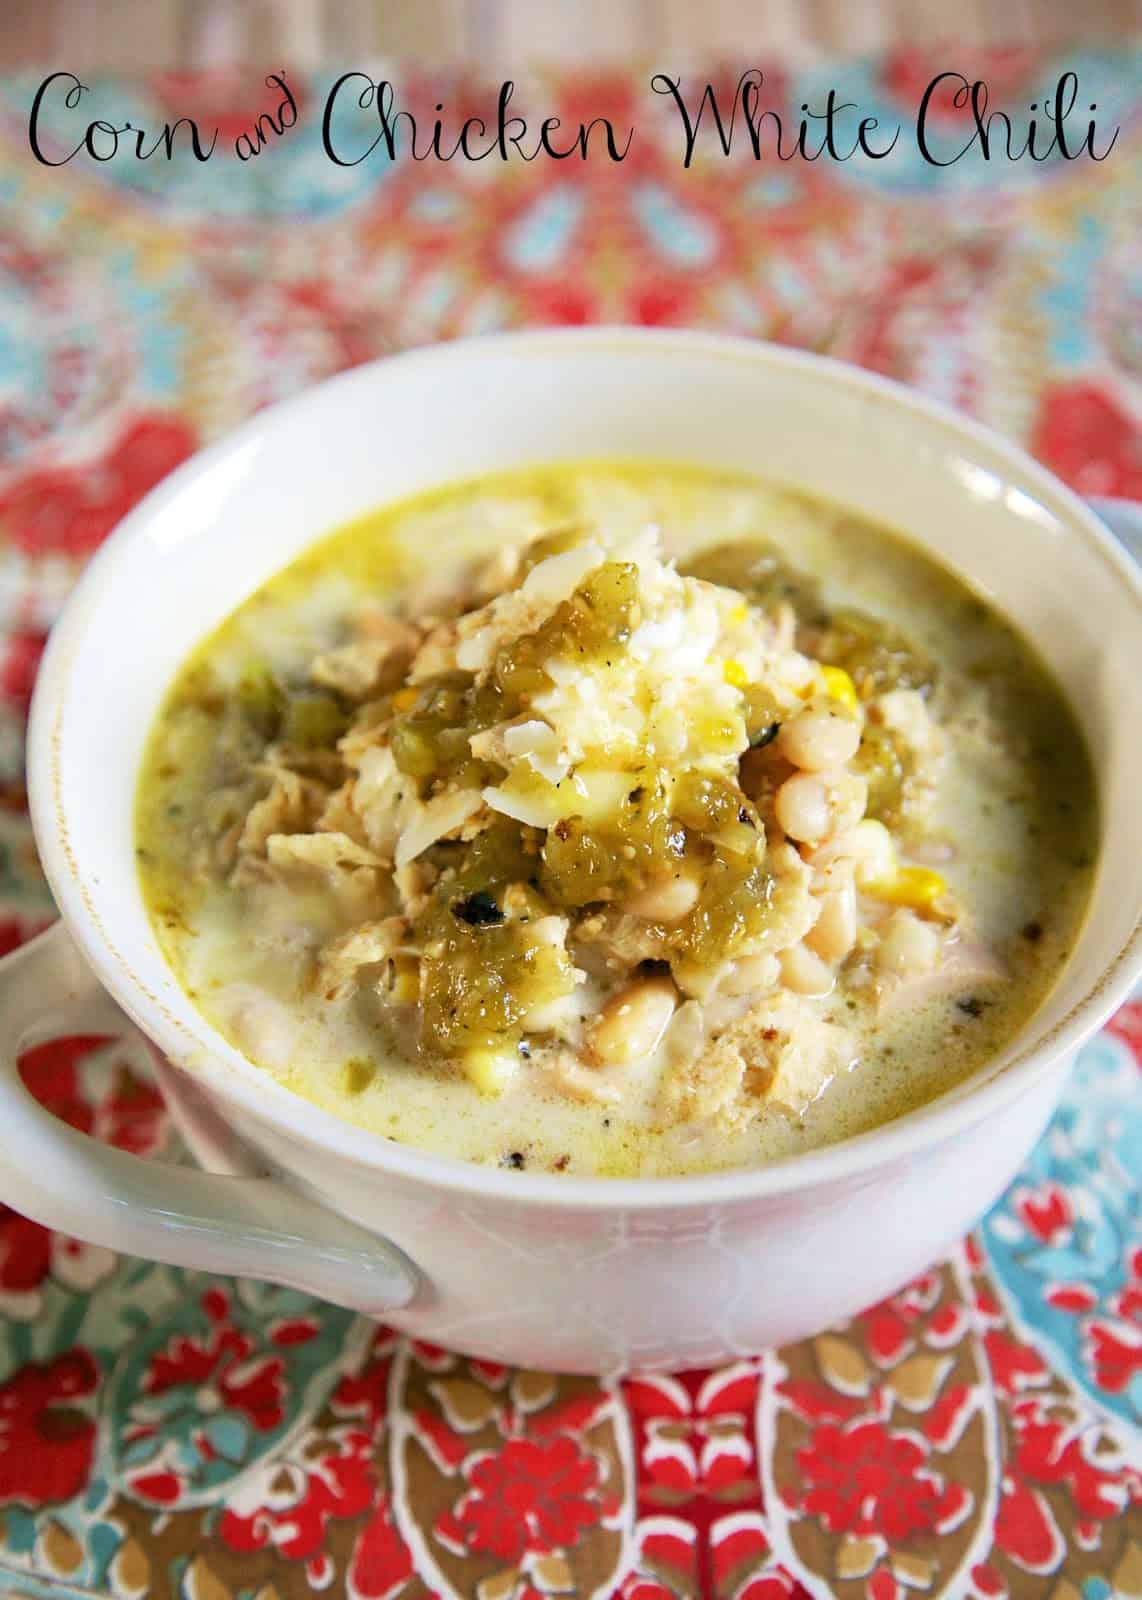 Corn and Chicken White Chili Recipe - made in the slow cooker - dried northern beans, chicken, green chiles, corn, chicken broth, half-and-half, cumin - slow cooks all day. Serve with some crusty bread or cornbread for an easy weeknight meal!